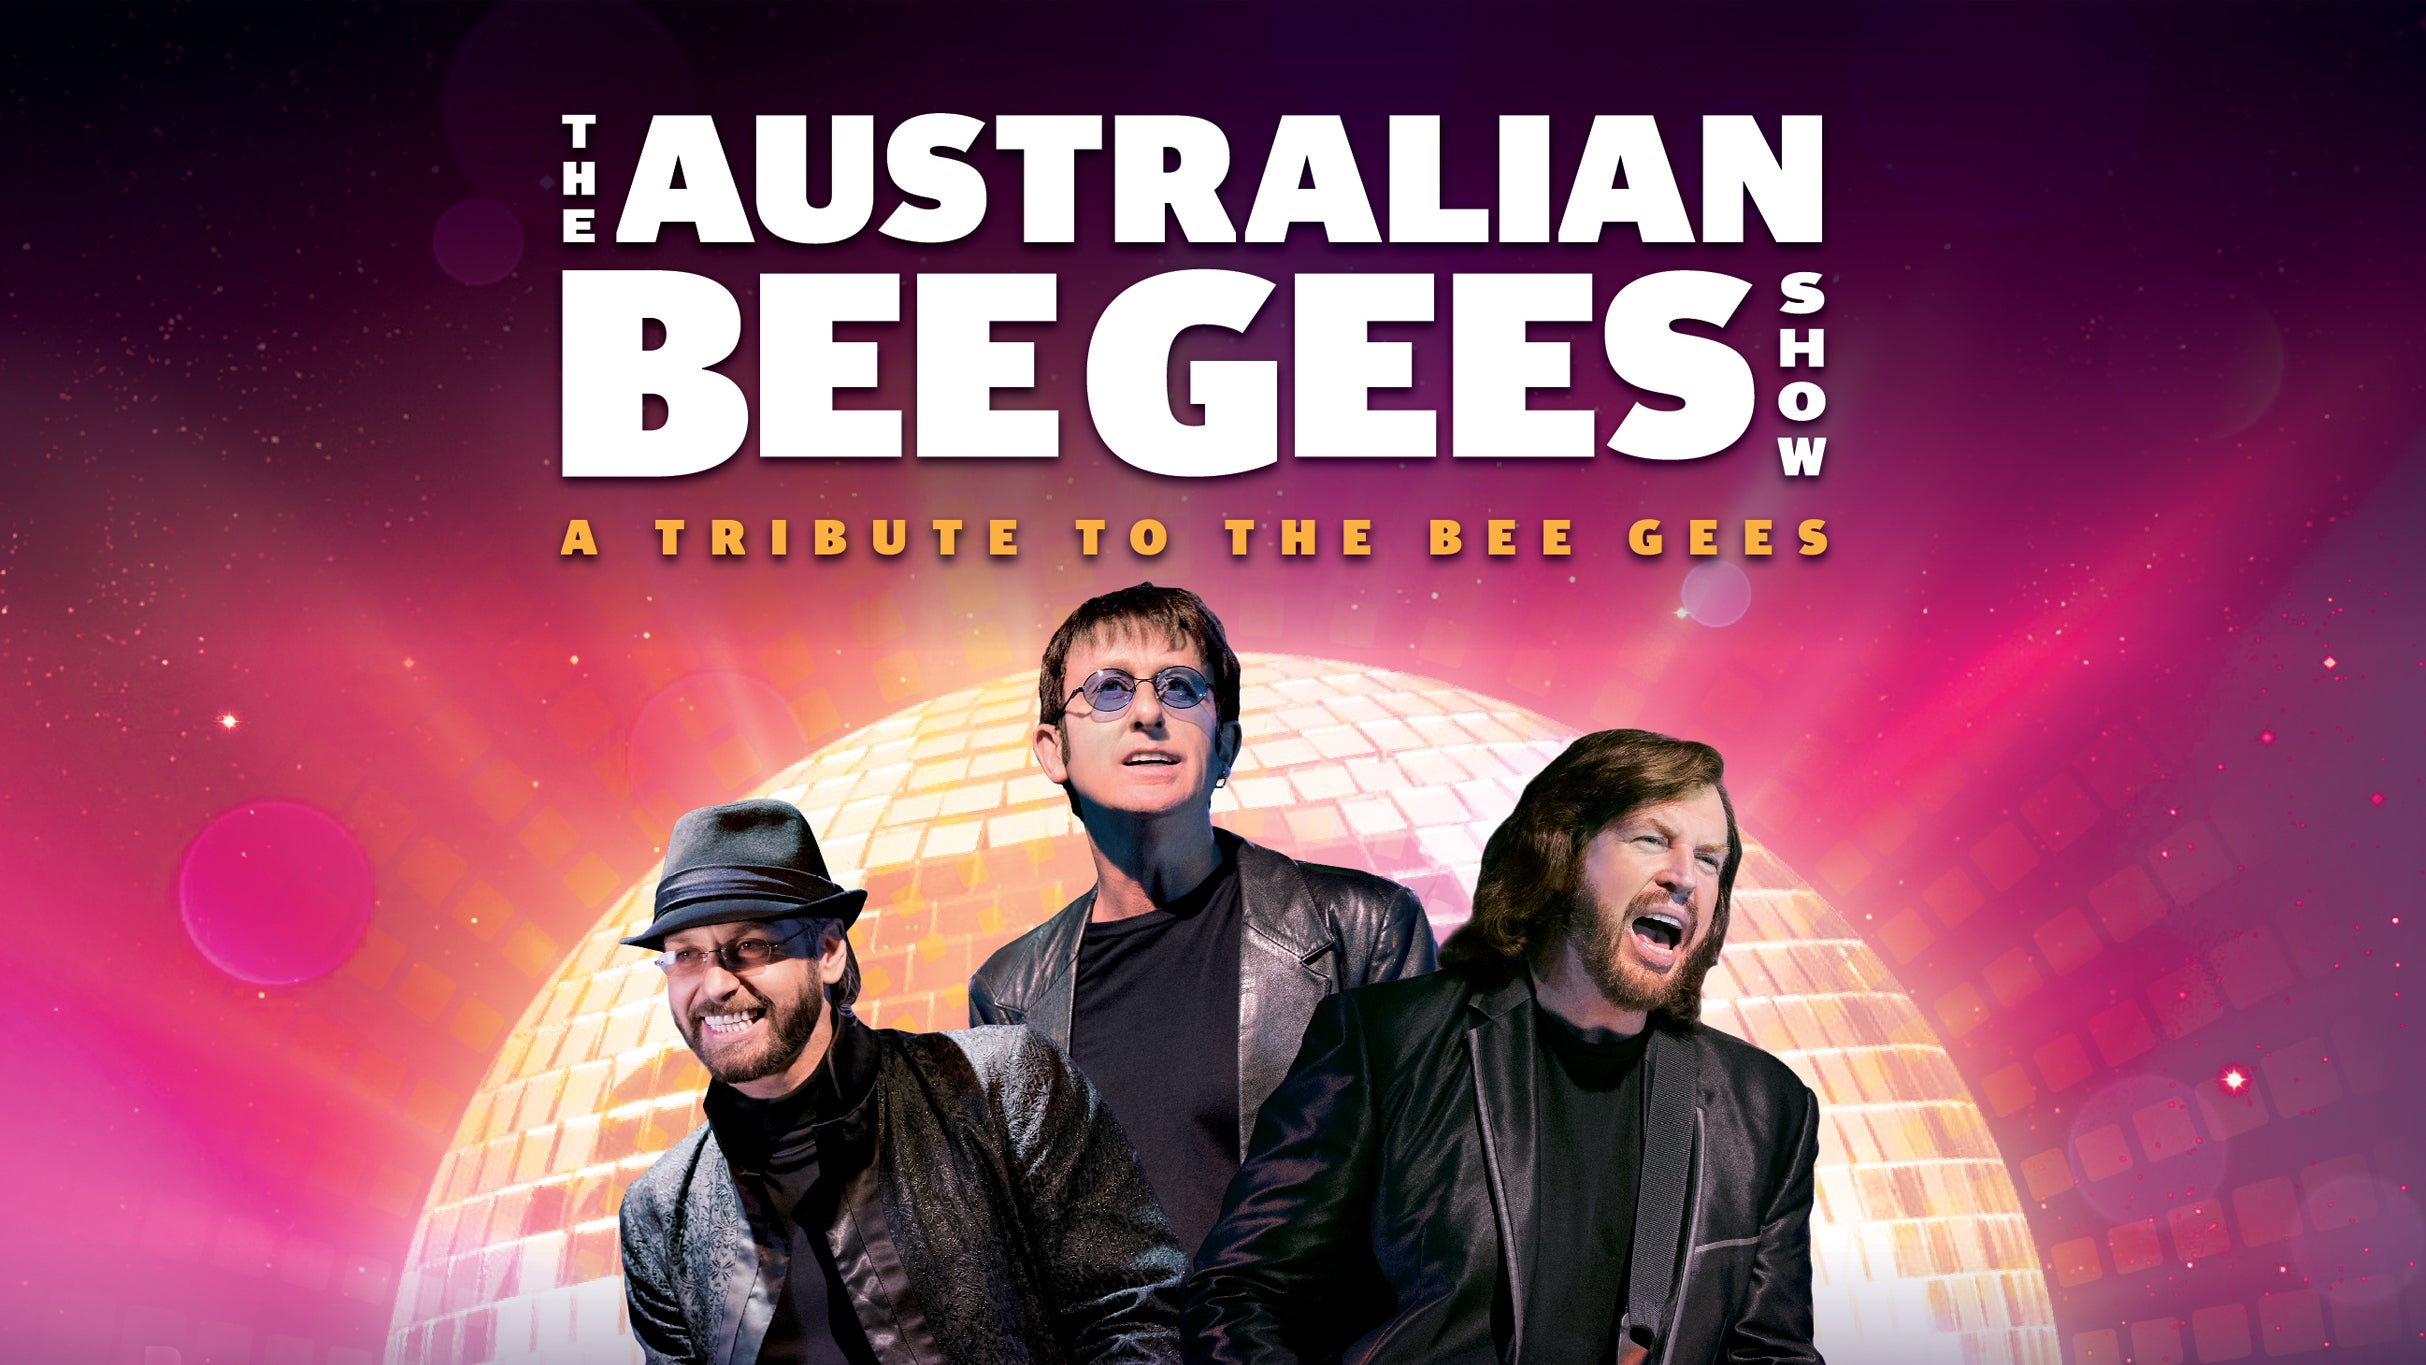 The Australian Bee Gees Show - A Tribute To The Bee Gees